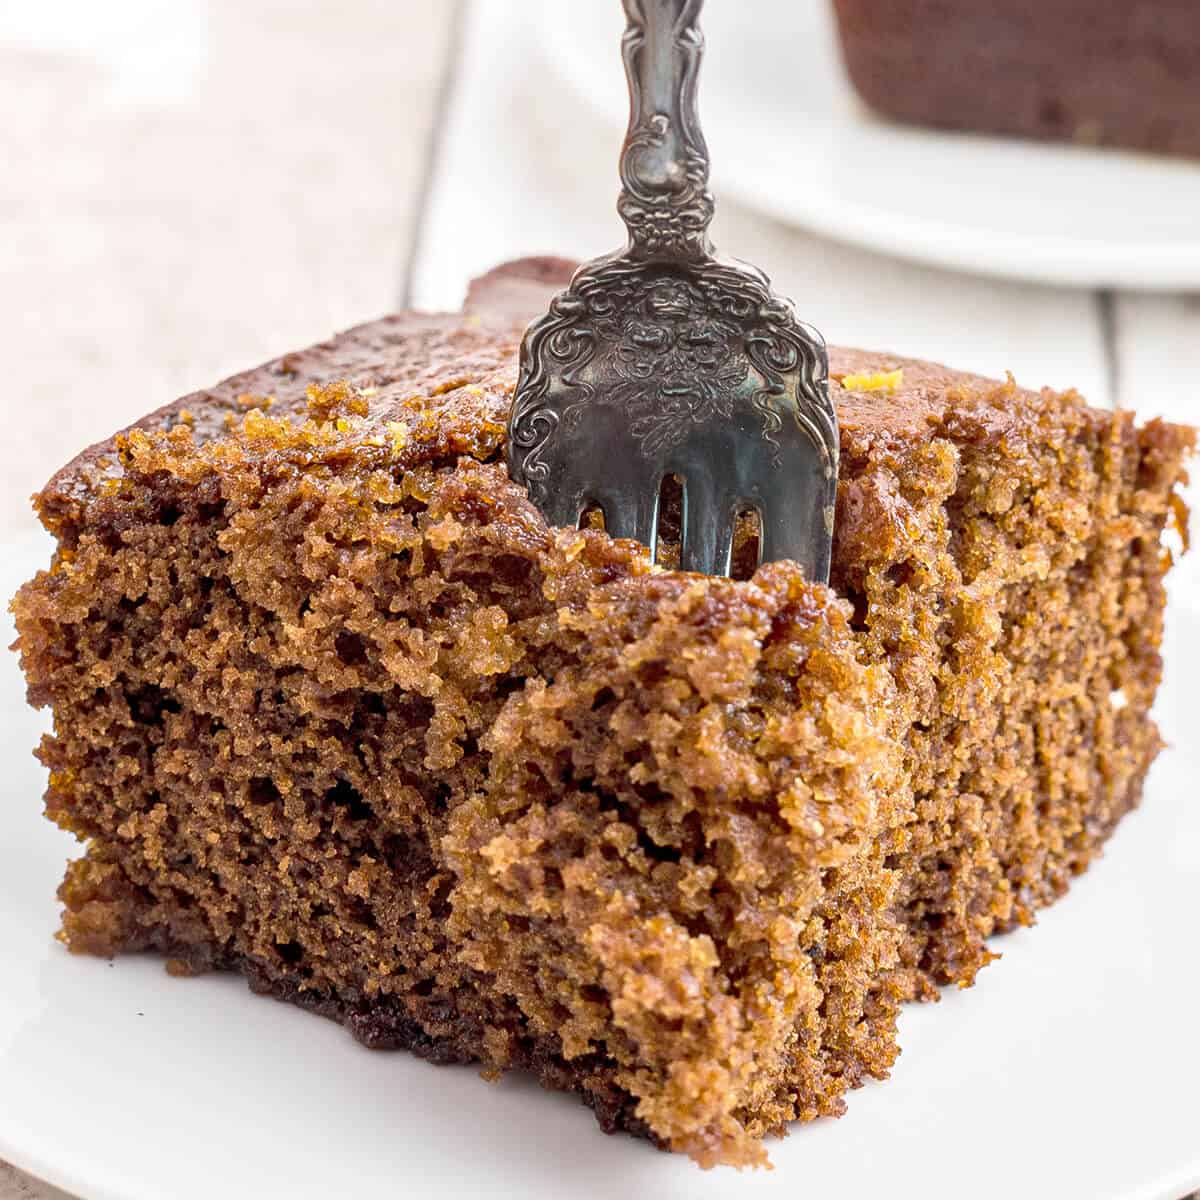 A serving of gingerbread with a vintage fork.